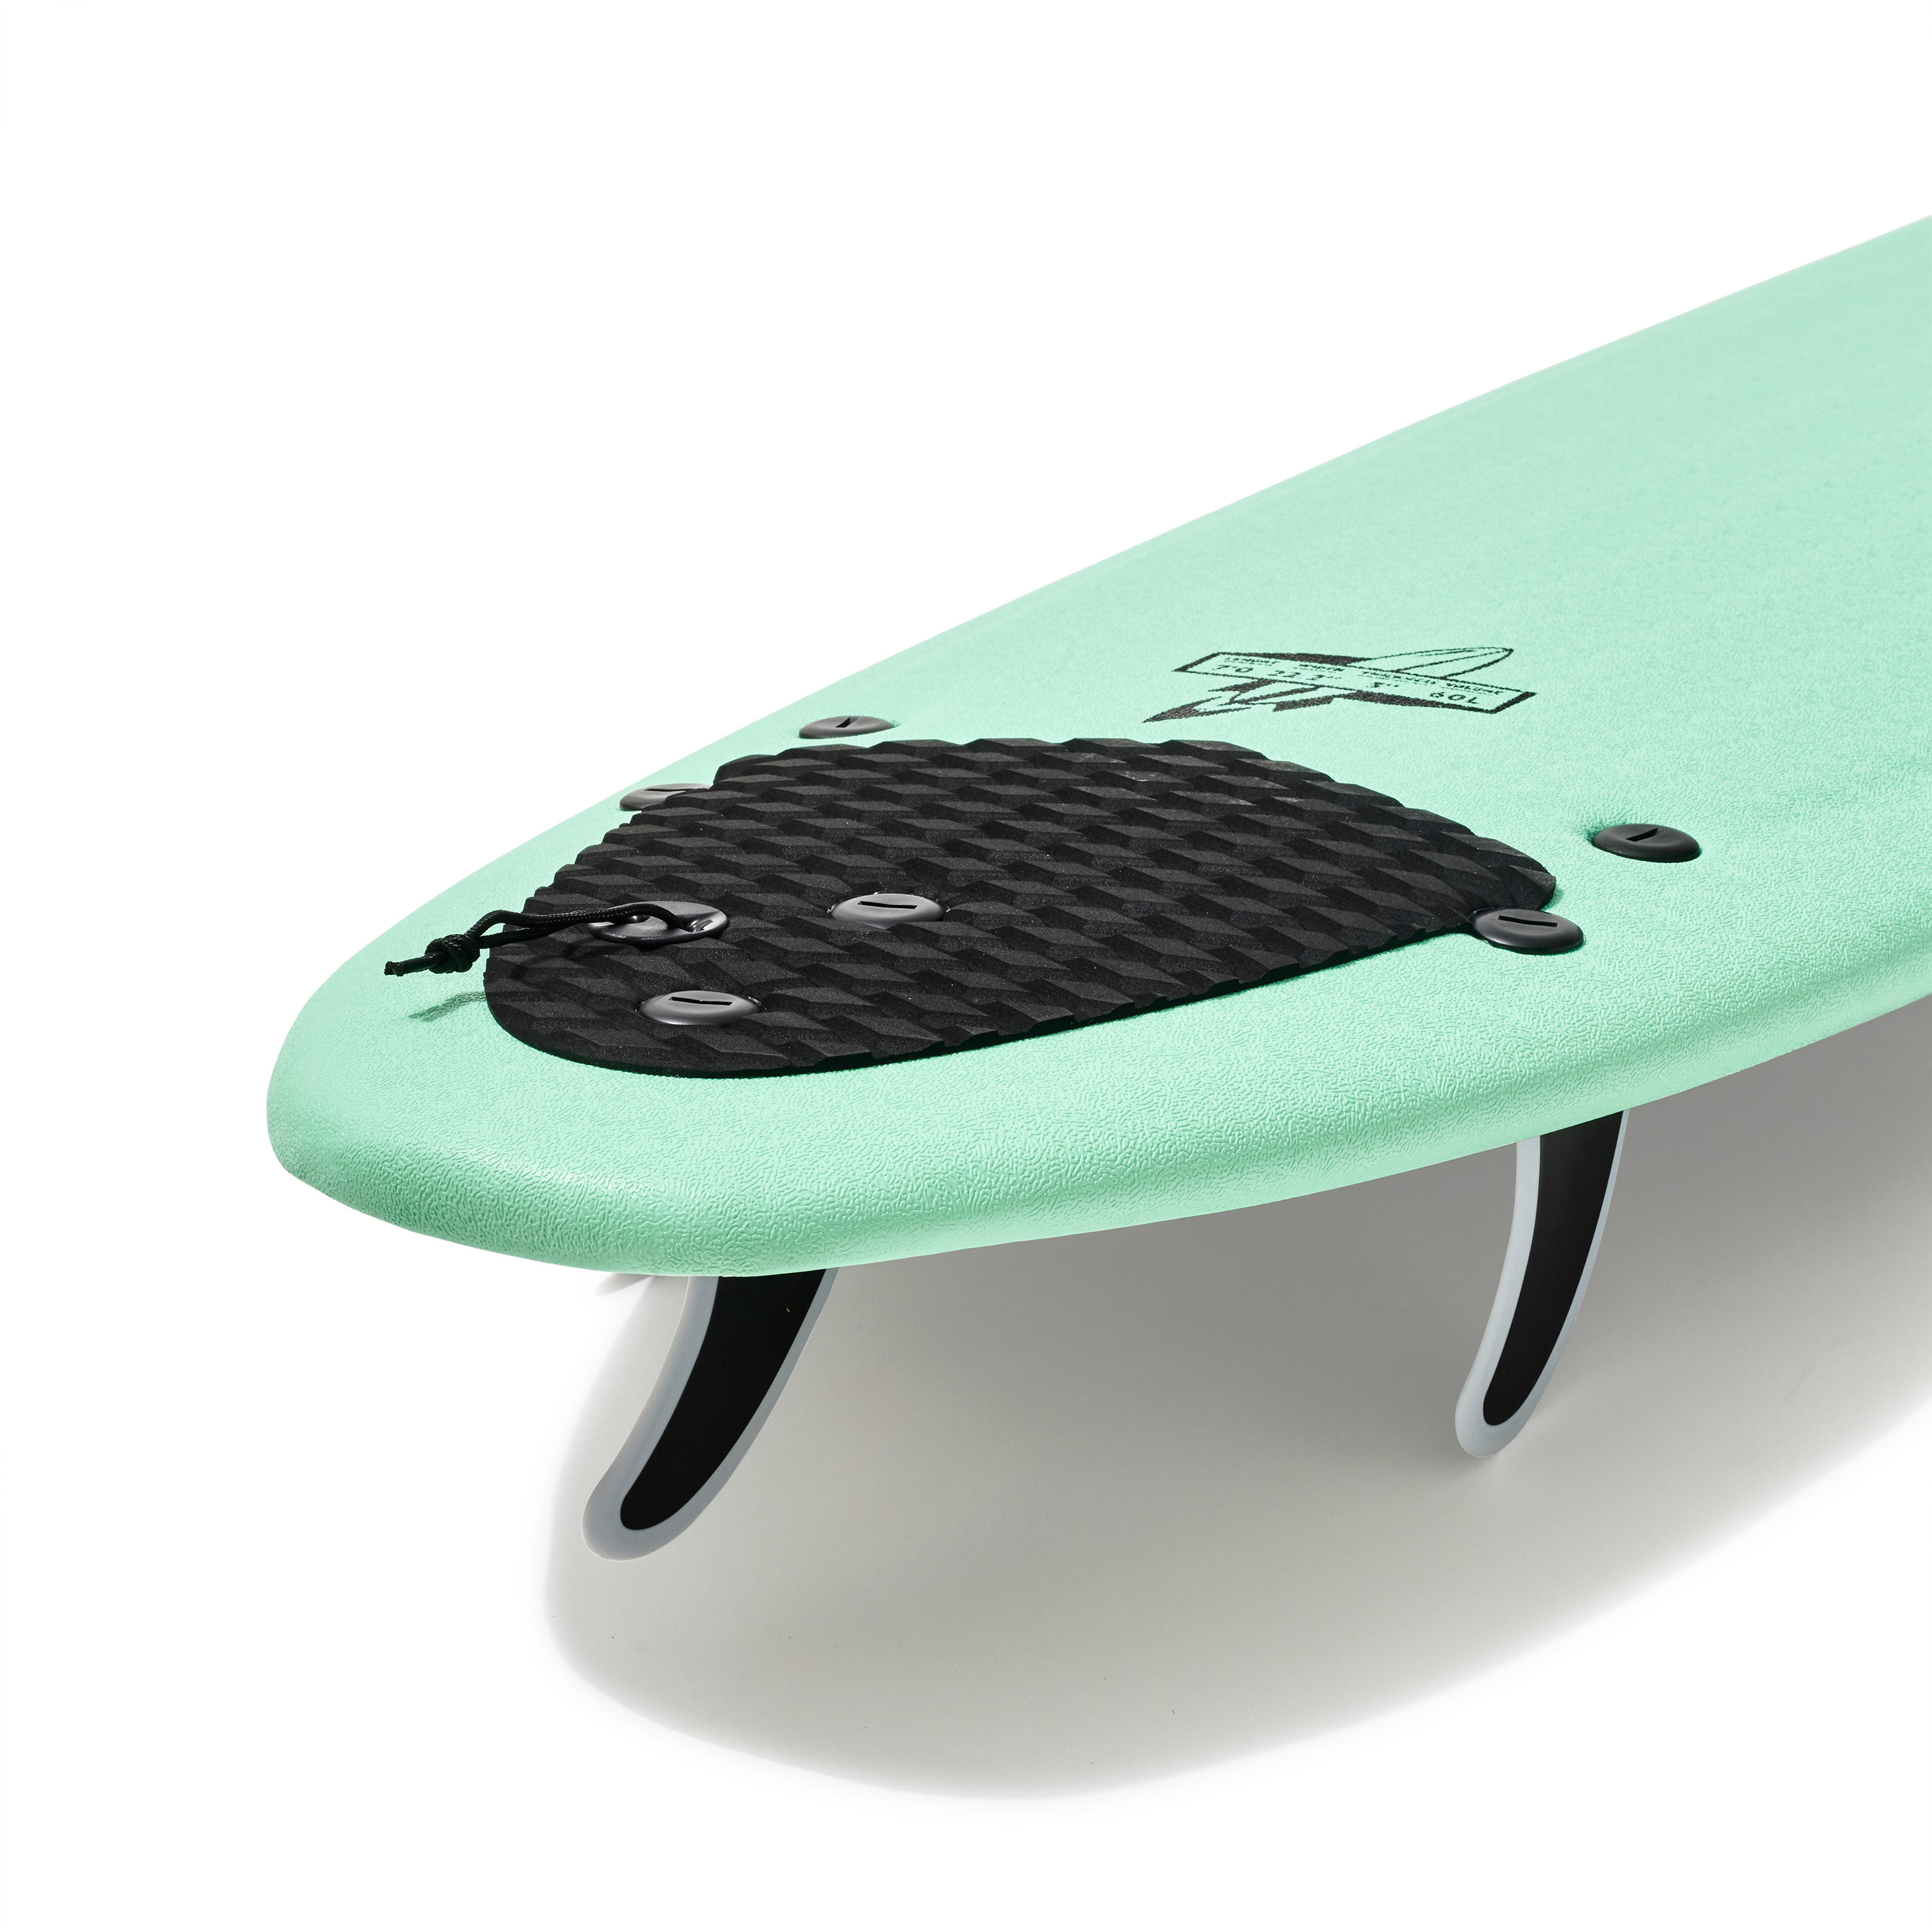 FOAM SURFBOARD 900 7’ . Comes with 3 fins. 5/11